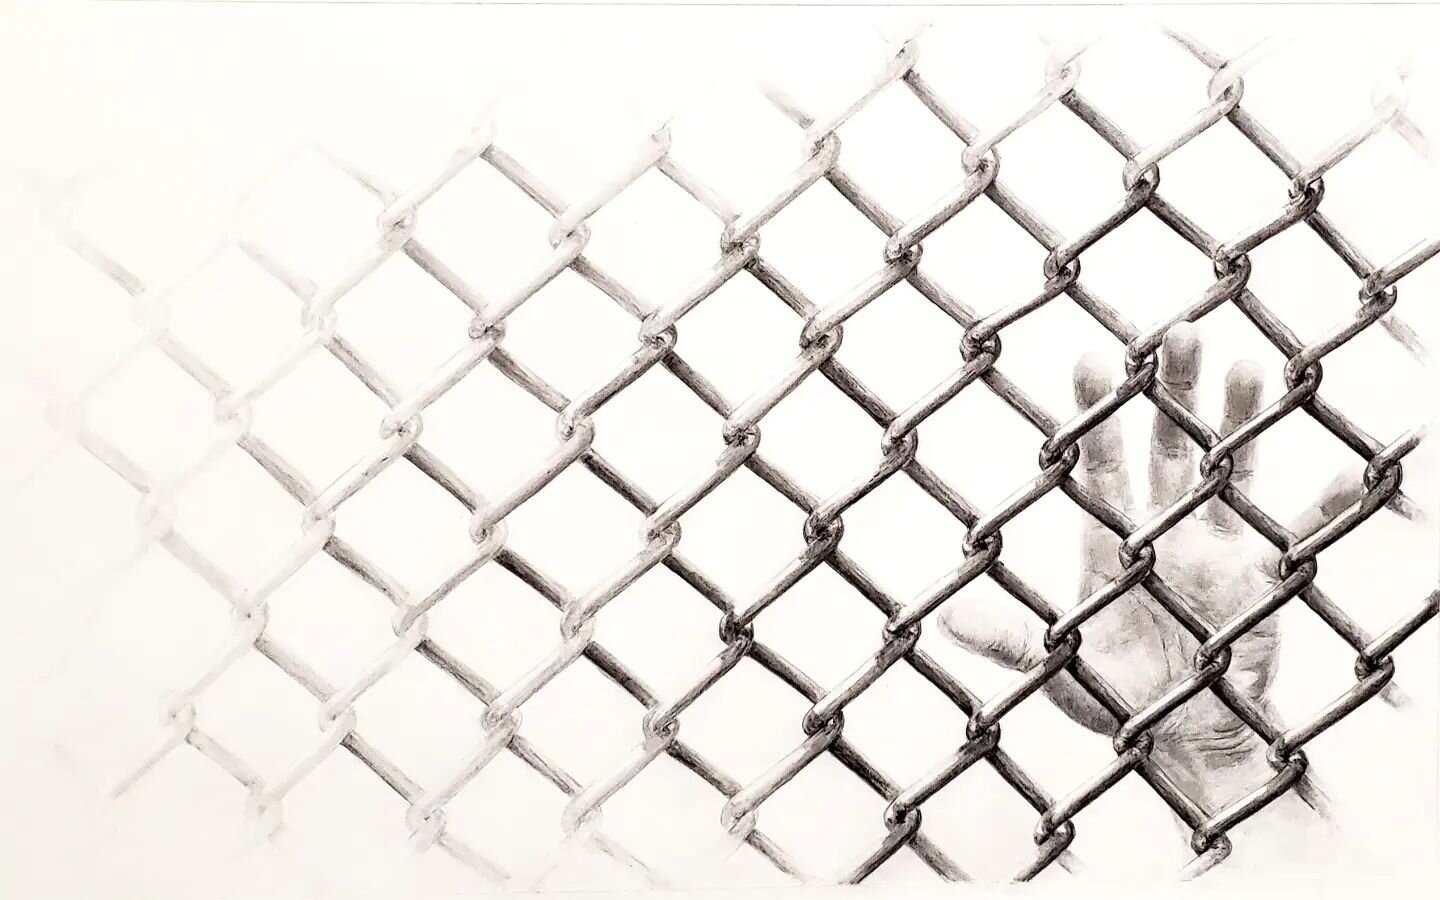 18x30 graphite on paper, from an entirely new body of work on the subject boundaries, borderlands, and borders. The metal fencing distorted to be thicker and denser and impenetrable, the hand softer and tactile. Thank you to Vermont Studio Center for